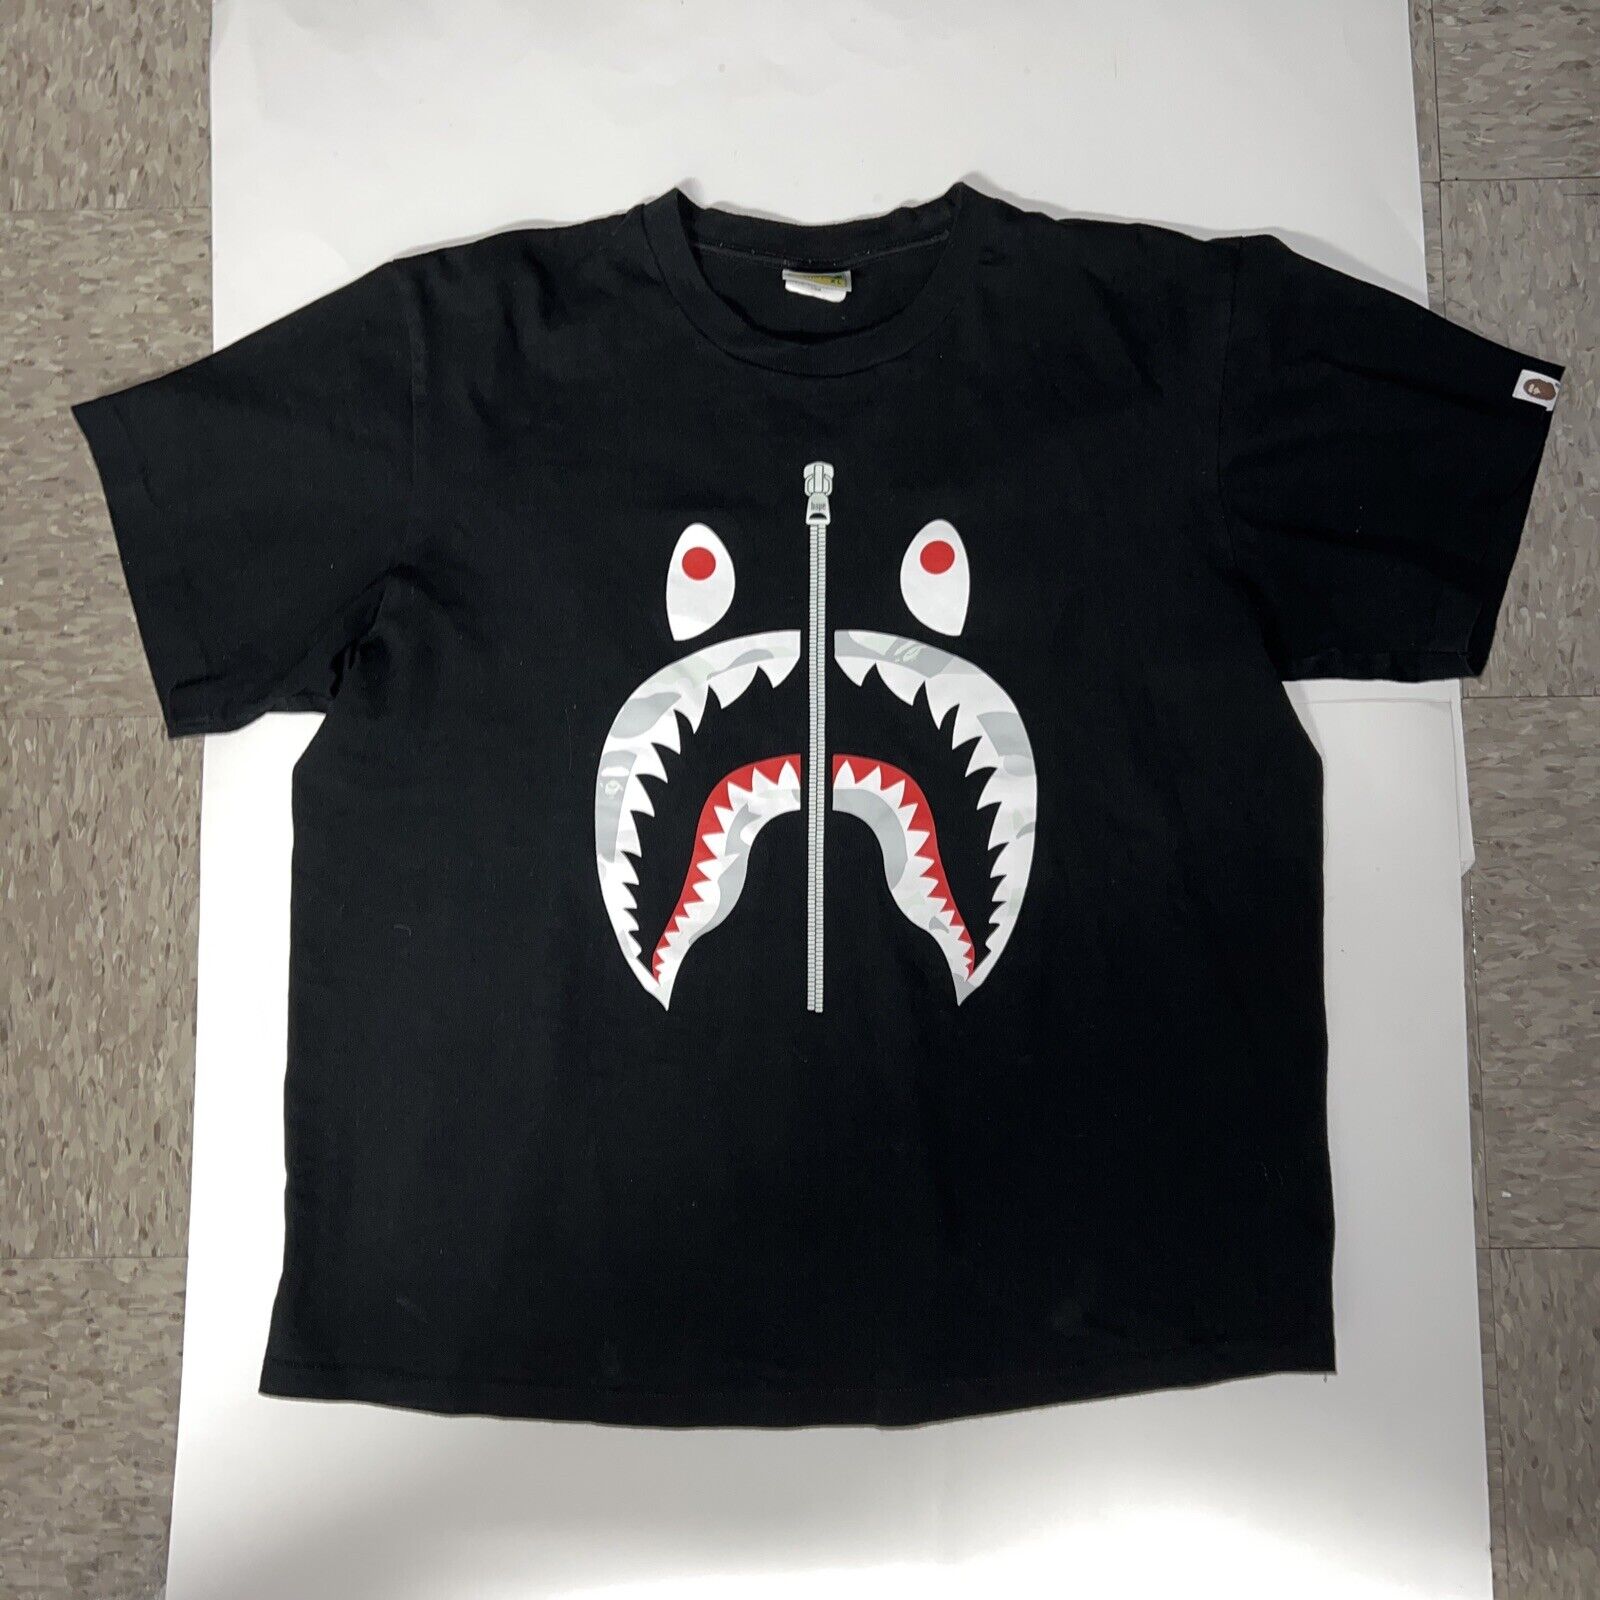 BAPE Space Camo Front Shark Tee Black Glow in the Dark Size XL Great  Comdition